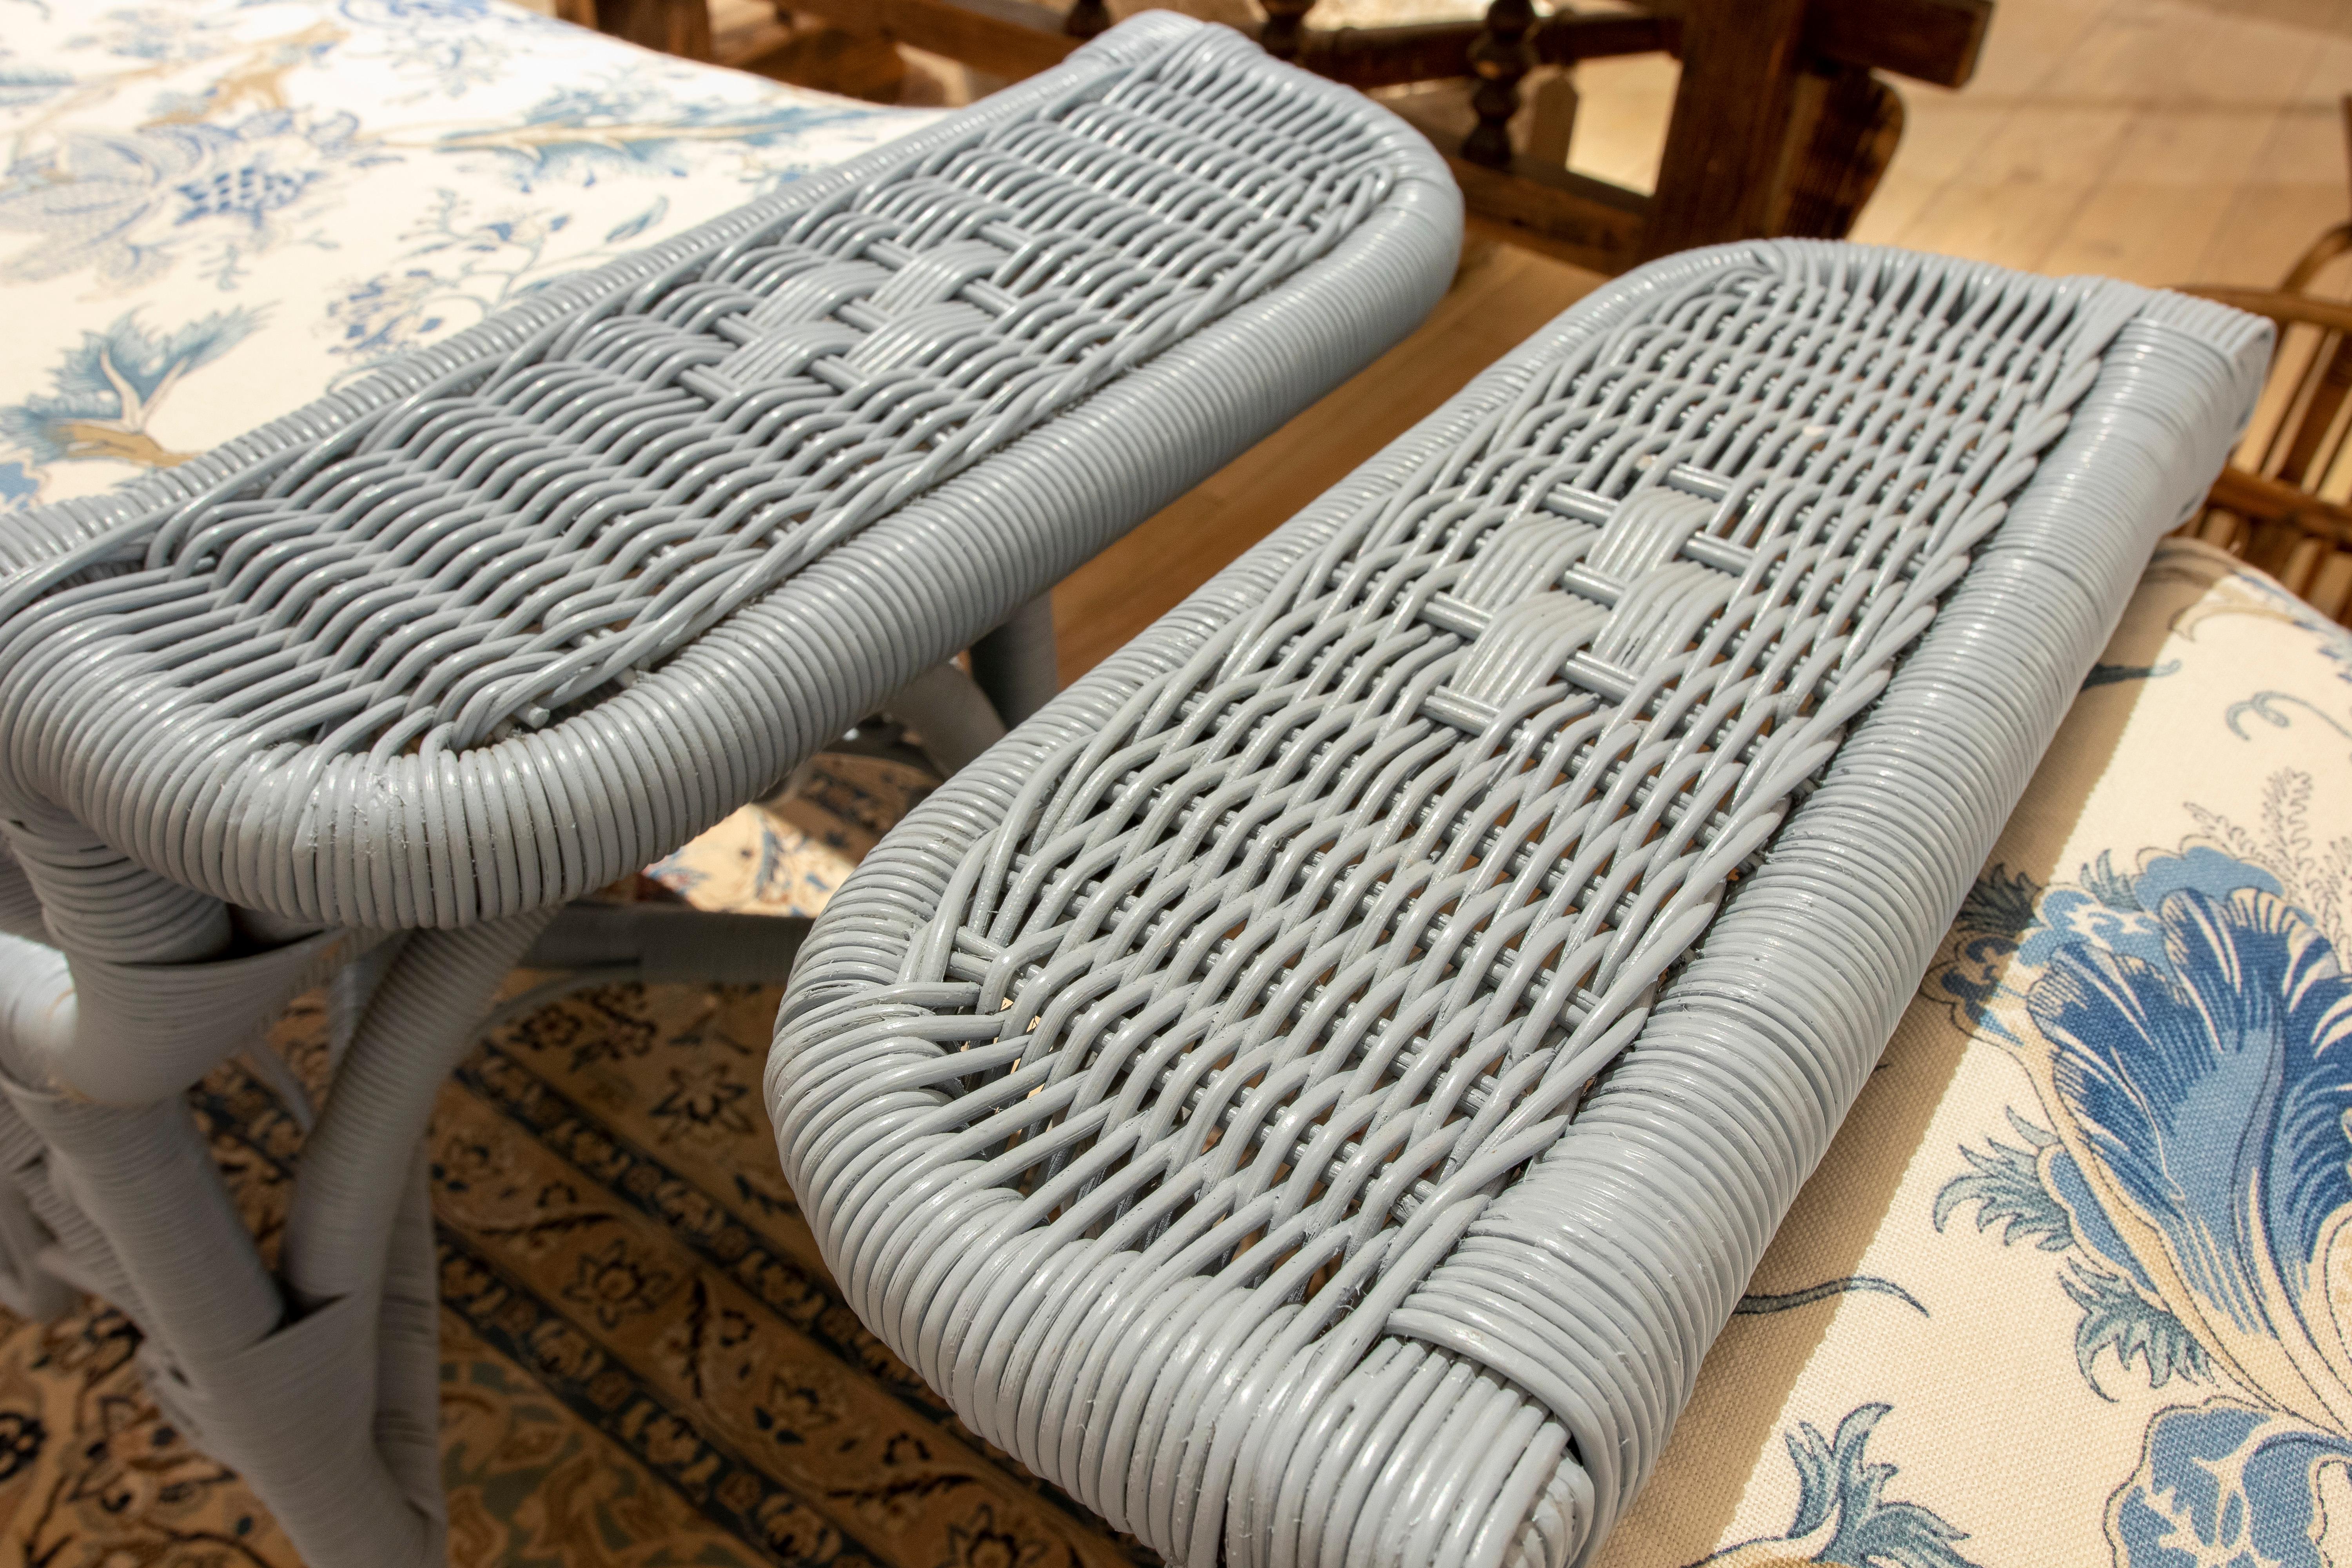 Spanish Pair of Handmade Wicker Stools Lacquered in White Colour 3